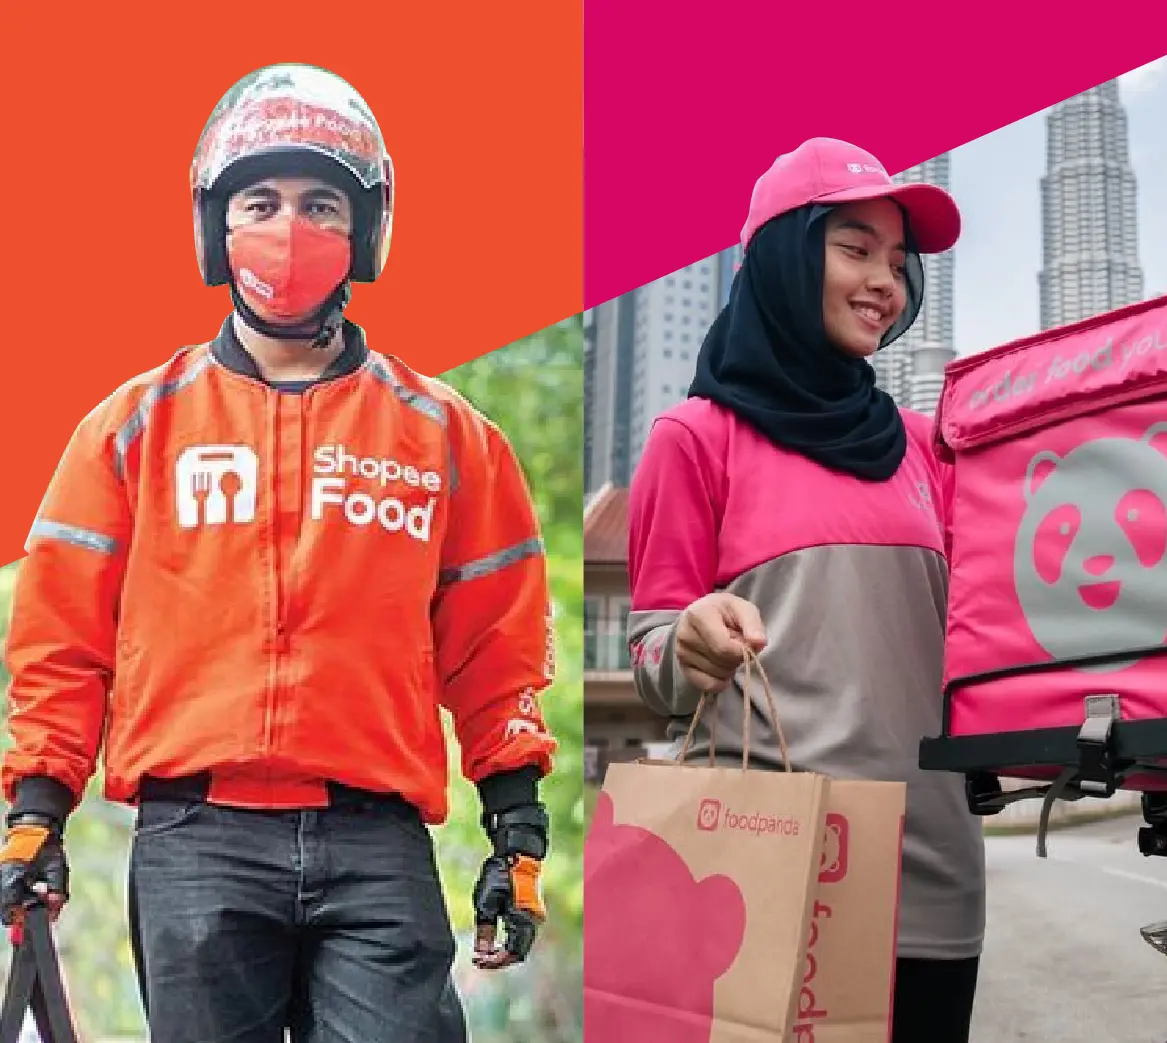 Image shows two different food delivery companies: shopee and foodpanda